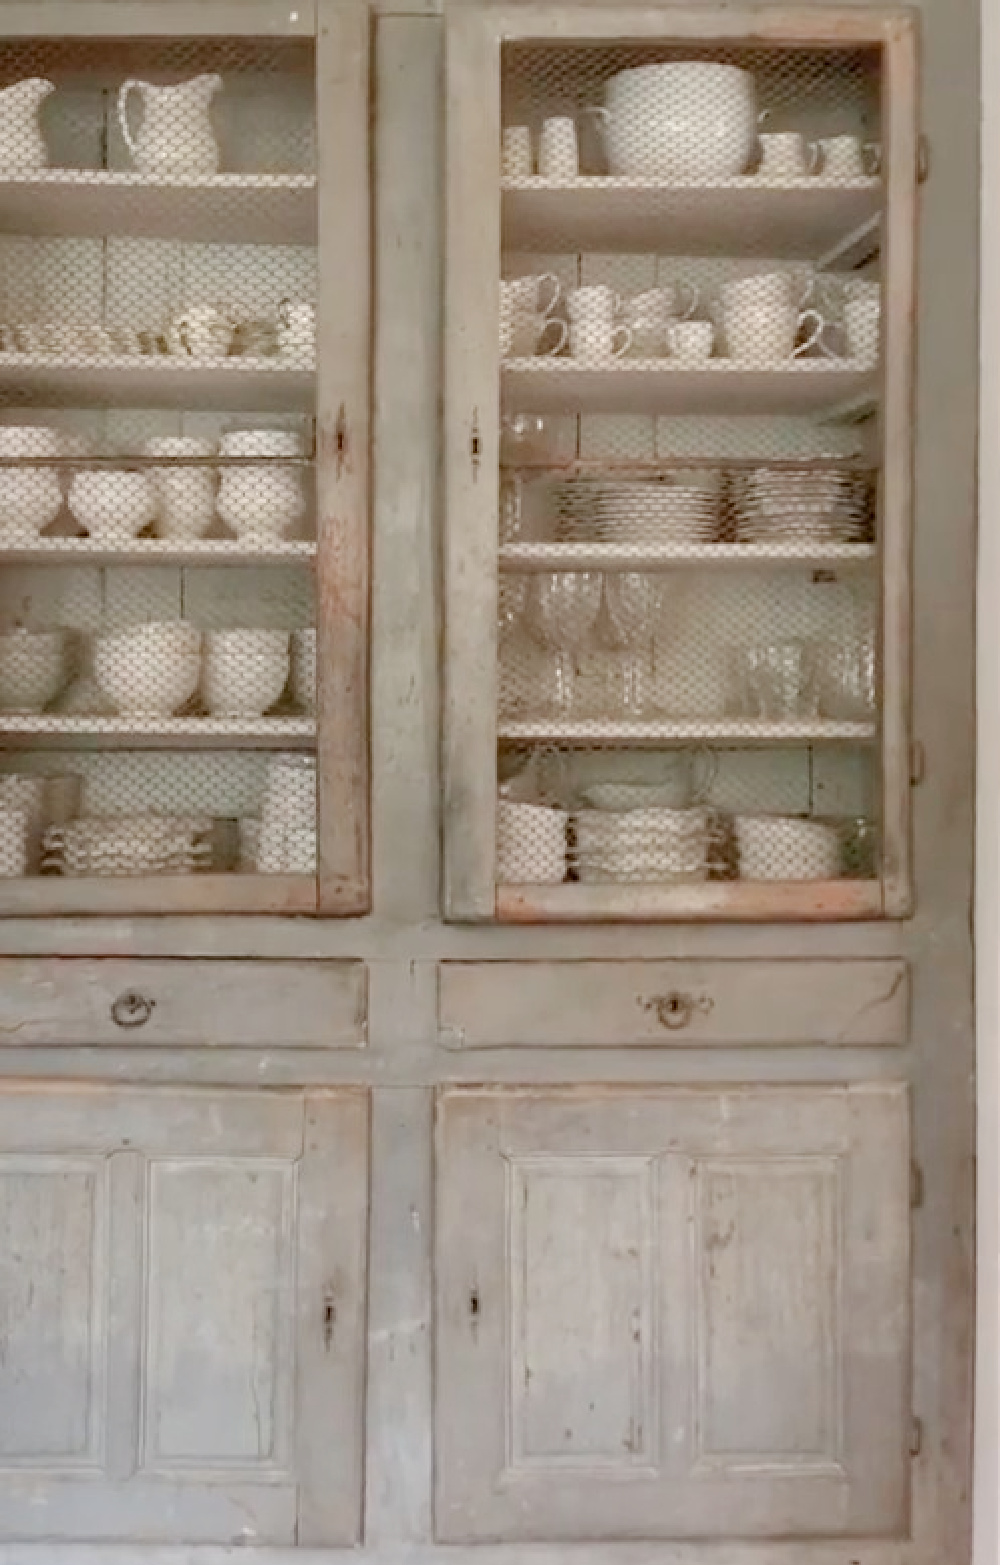 White French farmhouse dishware in an old blue-grey antique cupboard with chicken wire doors at Patina Farm - Velvet and Linen. #frenchfarmhouse #europeanantiques #frenchkitchen